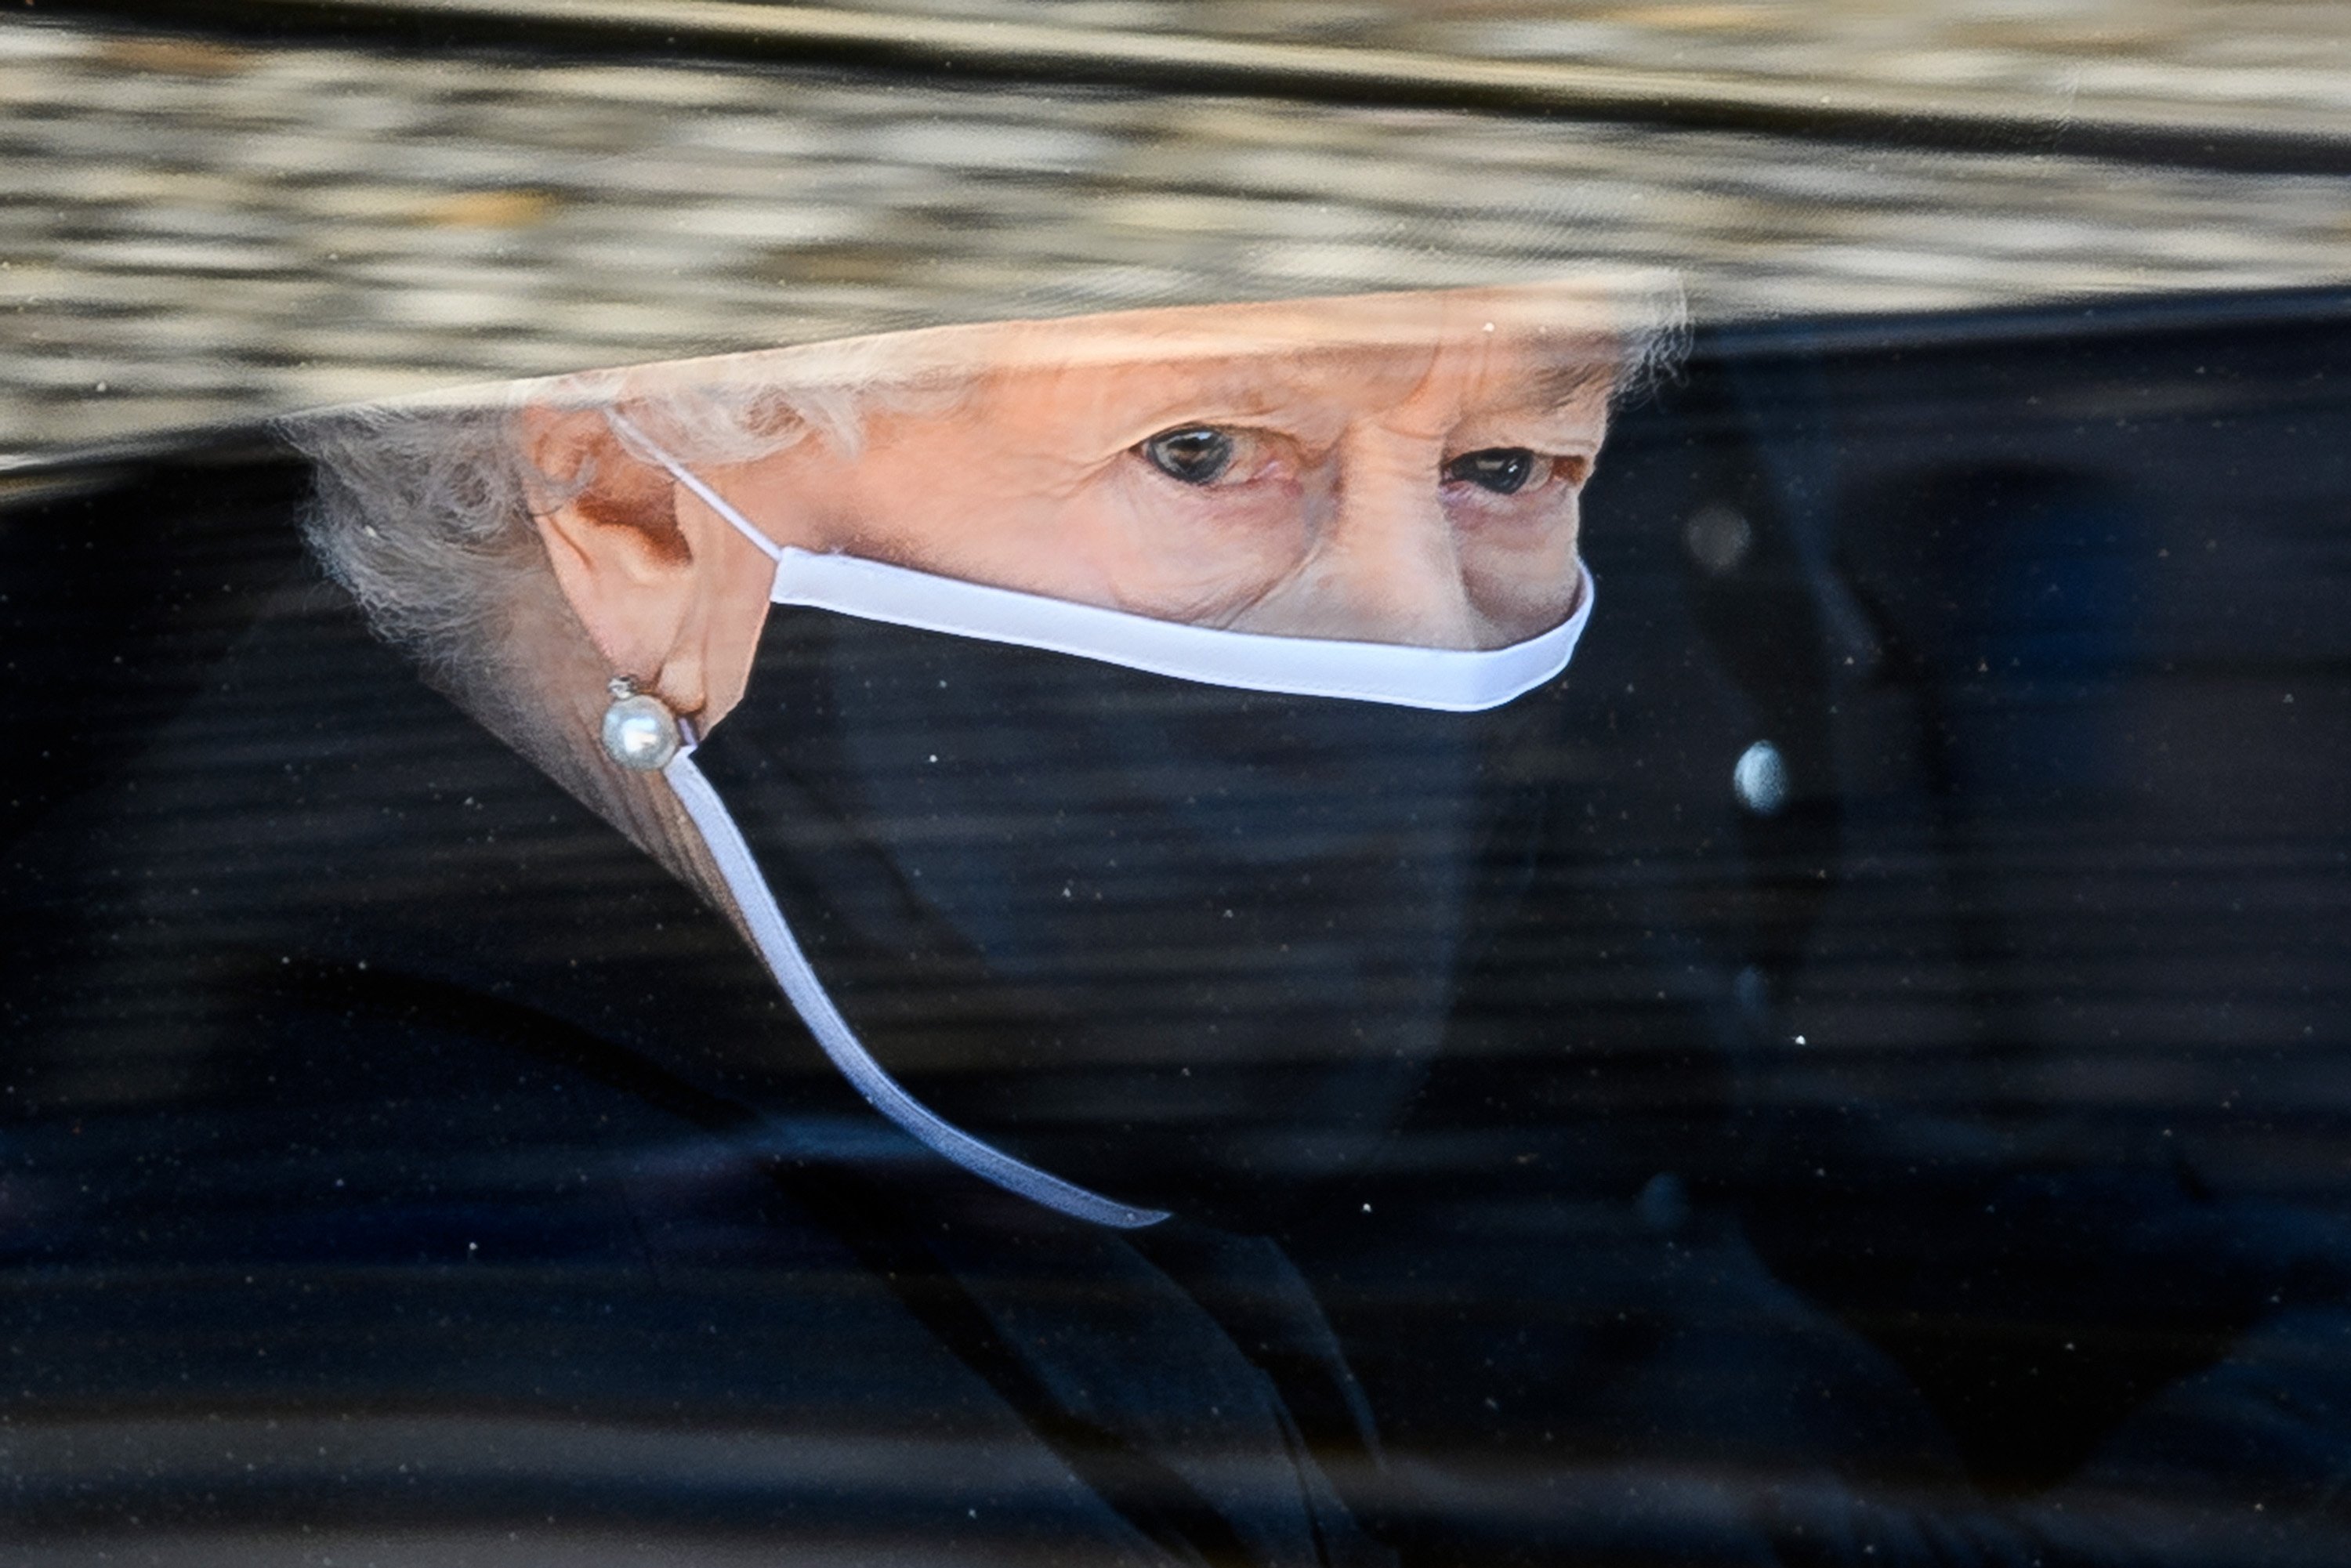 Queen Elizabeth II during the funeral of Prince Philip at Windsor Castle on April 17, 2021, in Windsor, England | Source: Getty Images